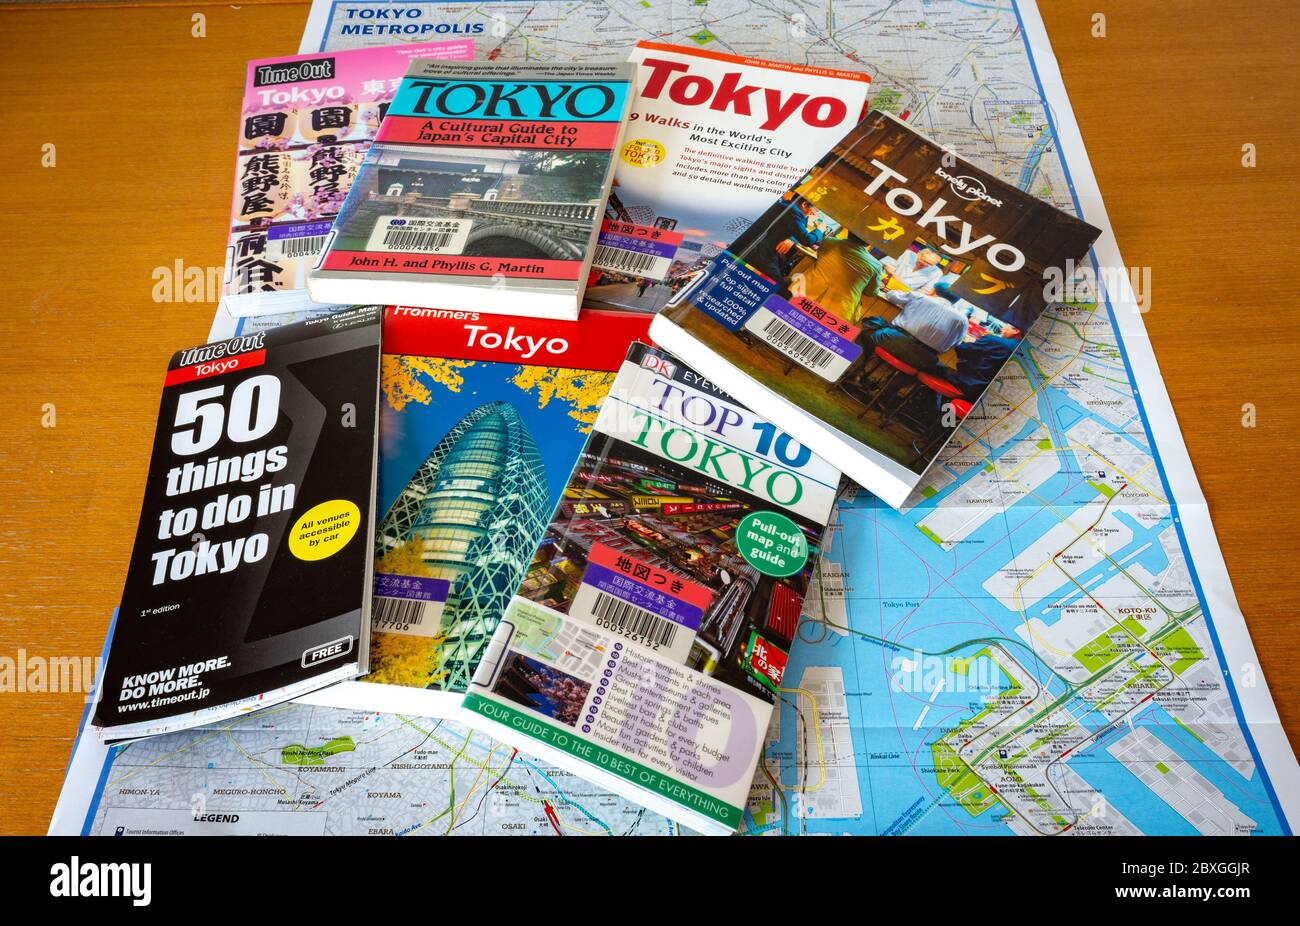 Tokyo / Japan - October 15, 2017: Various Tokyo travel guides with Tokyo City Map spread on the table. Planning journey to Tokyo. Stock Photo